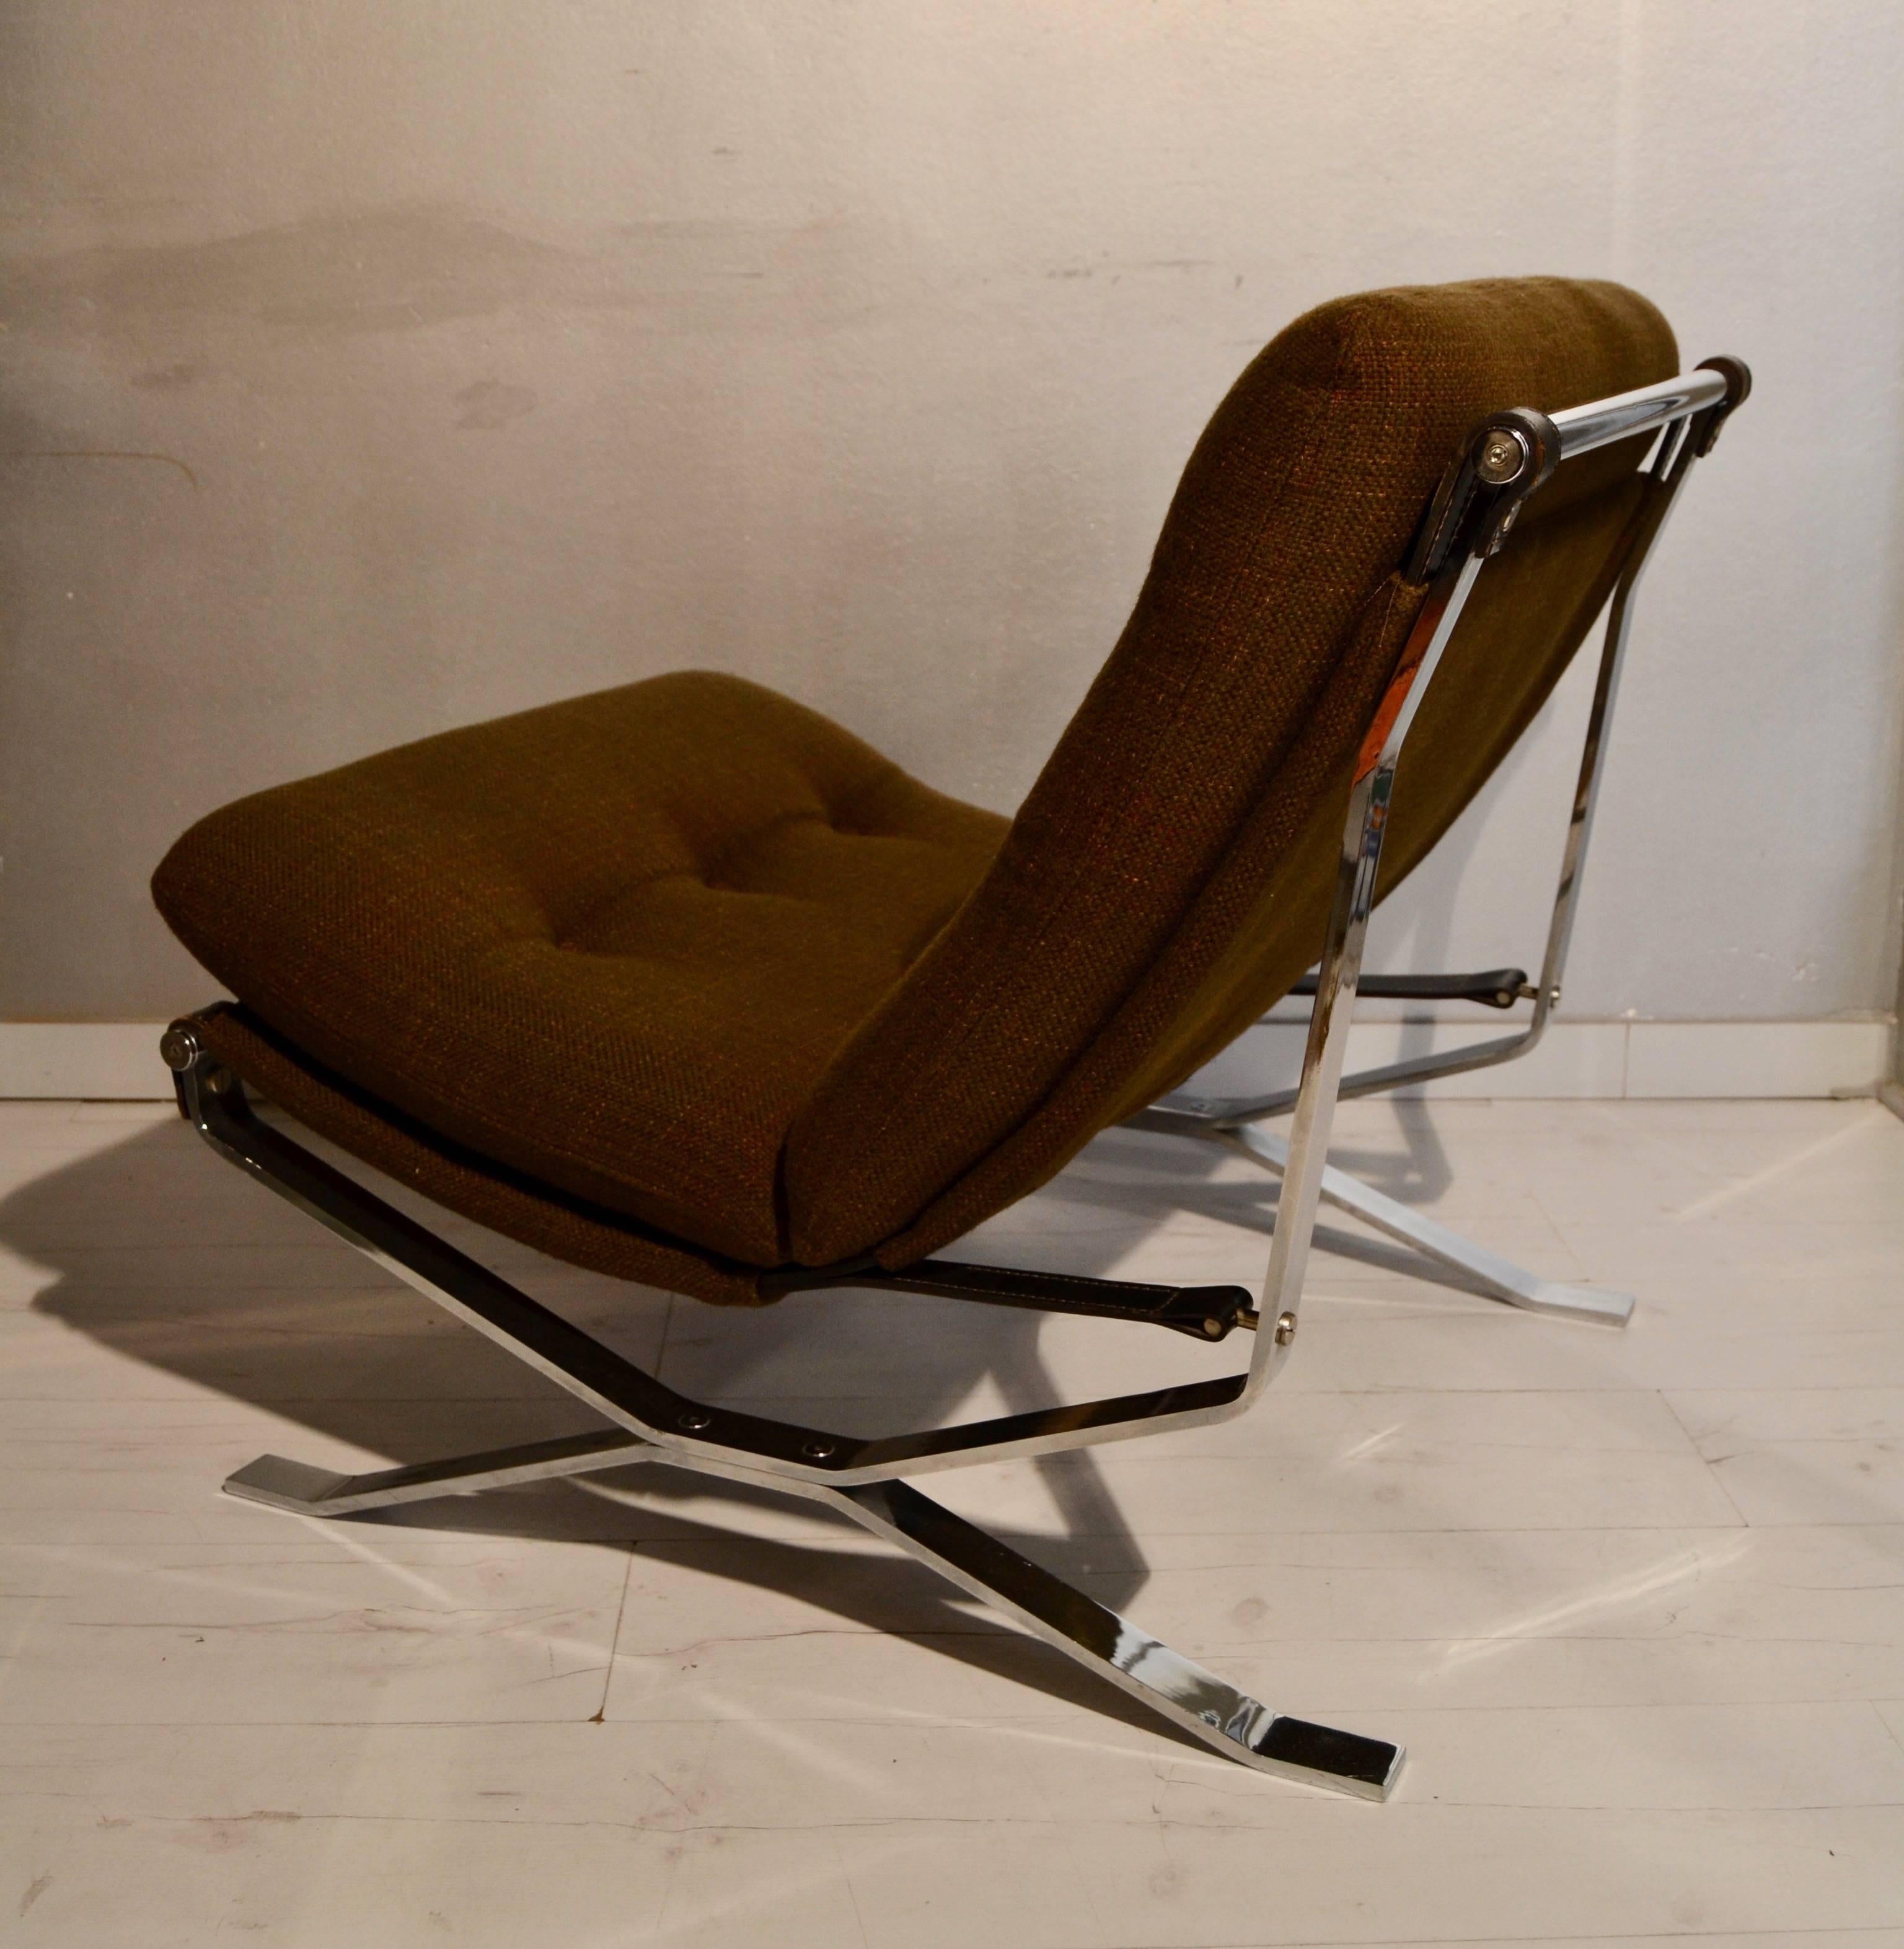 Pair of steel, black leather and brown wool fabric chairs designed by Ico Parisi for MiM in 1969. Great quality on massif chromed steel
Great condition.
  